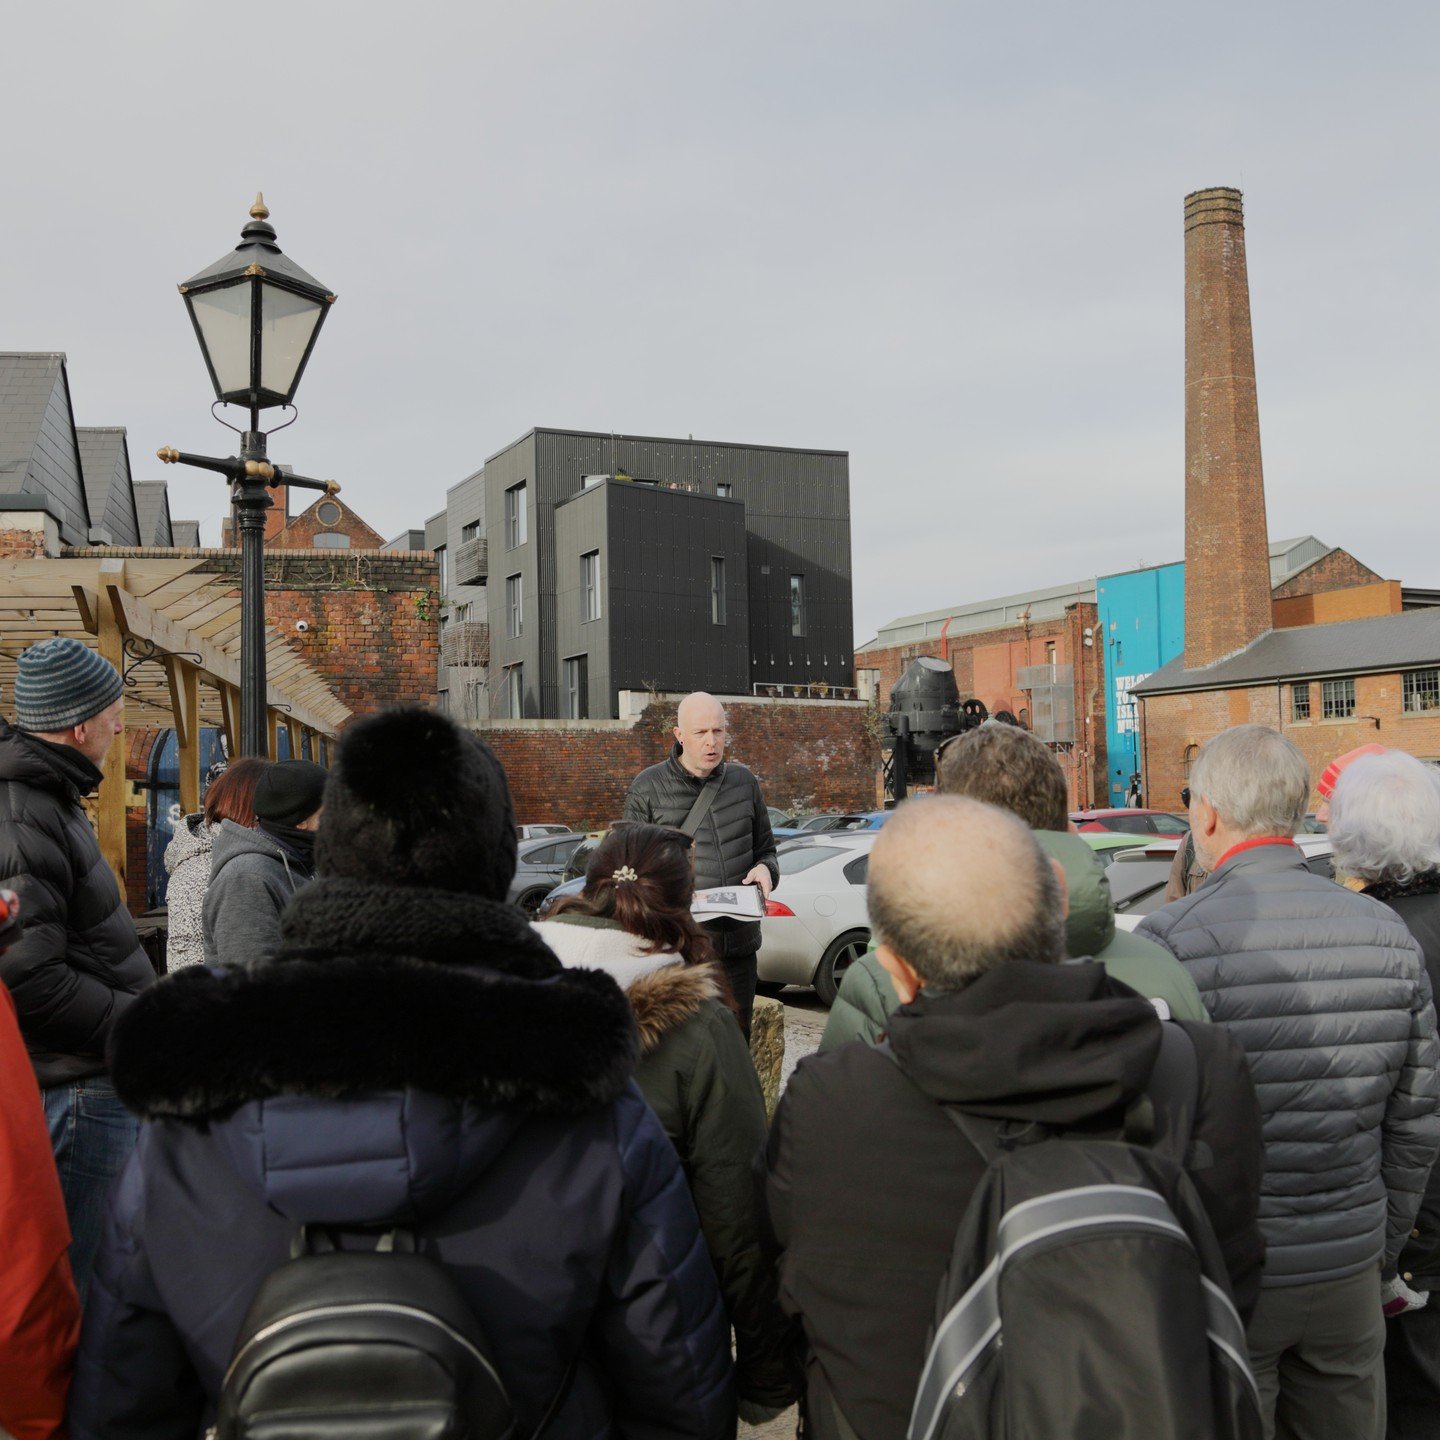 5 year anniversary! Yesterday Facebook reminded me that it was five years since I did my first walking tour of Kelham Island.

For many years I'd wanted to run walking tours, but I never expected it to happen (too busy, not knowing how to put a walk 